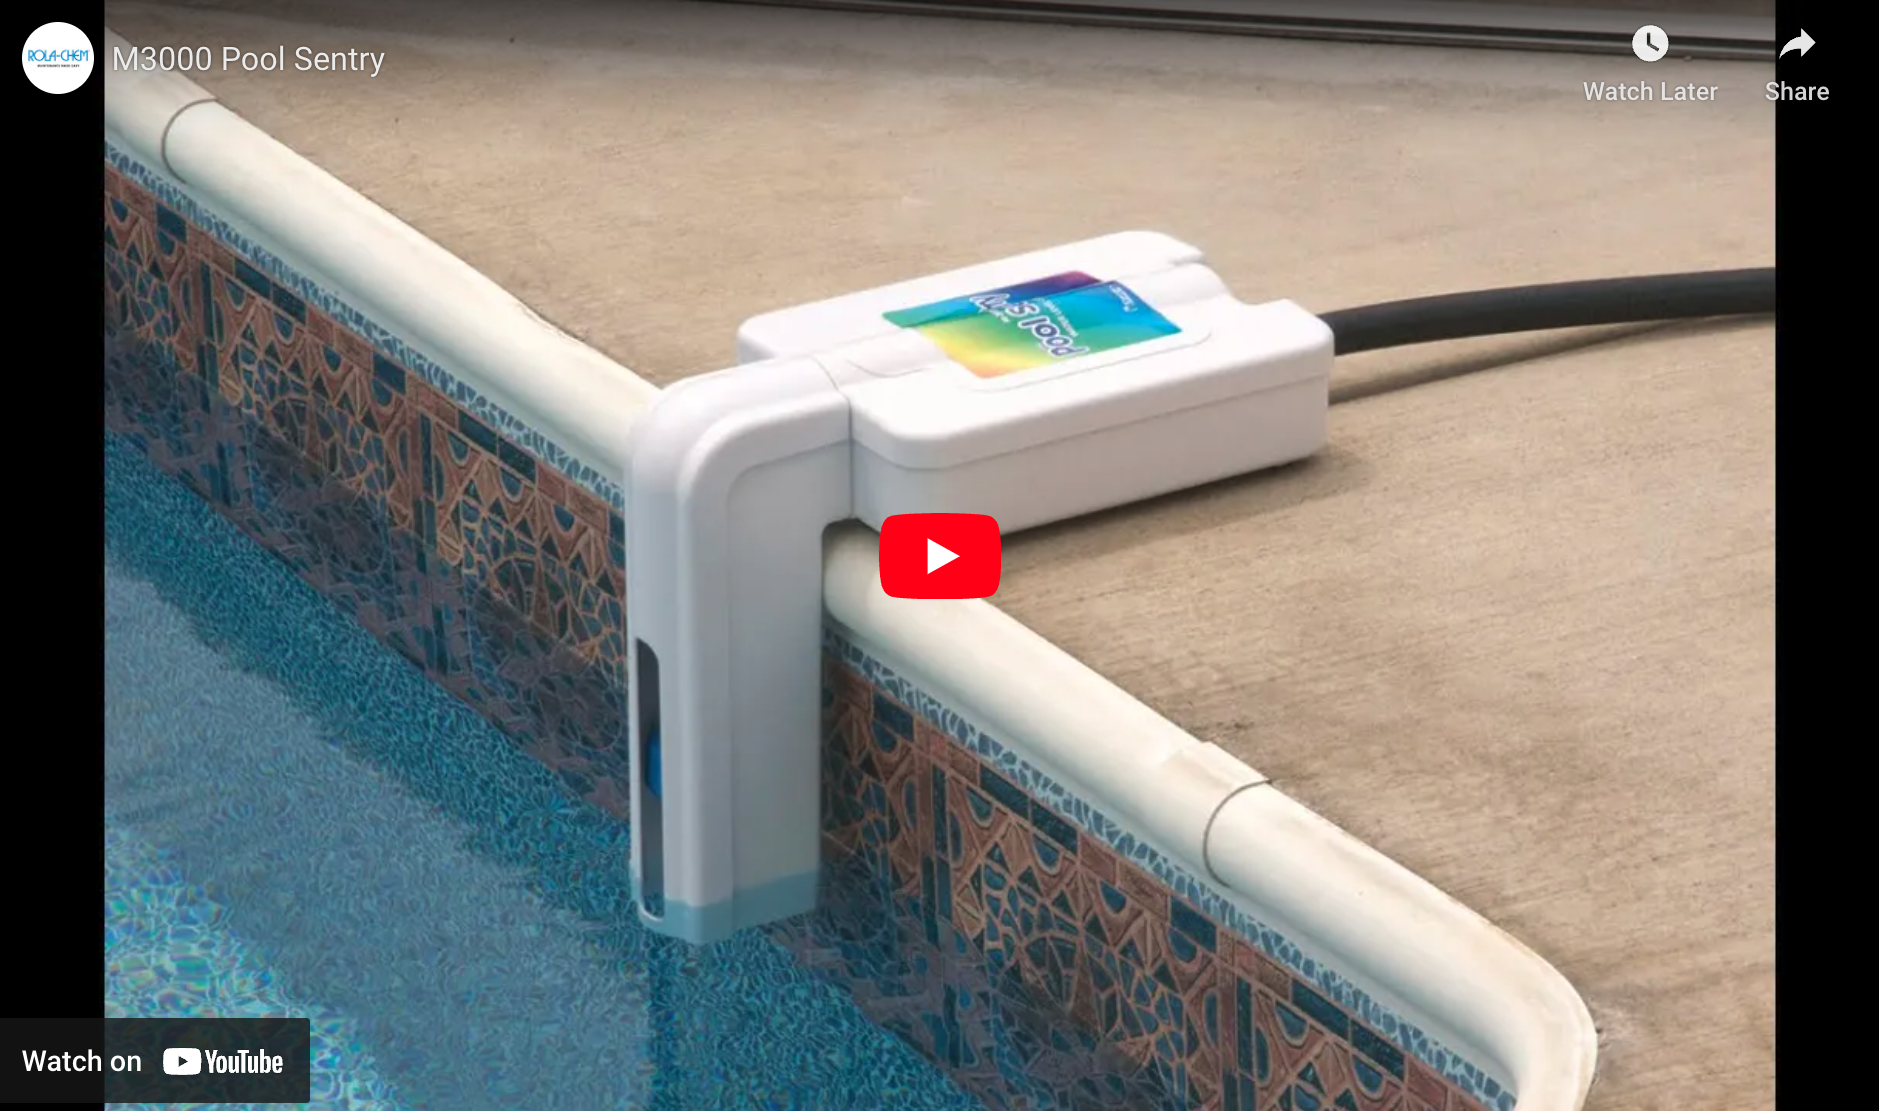 Pool Sentry M3000 Water Leveler, How it Works